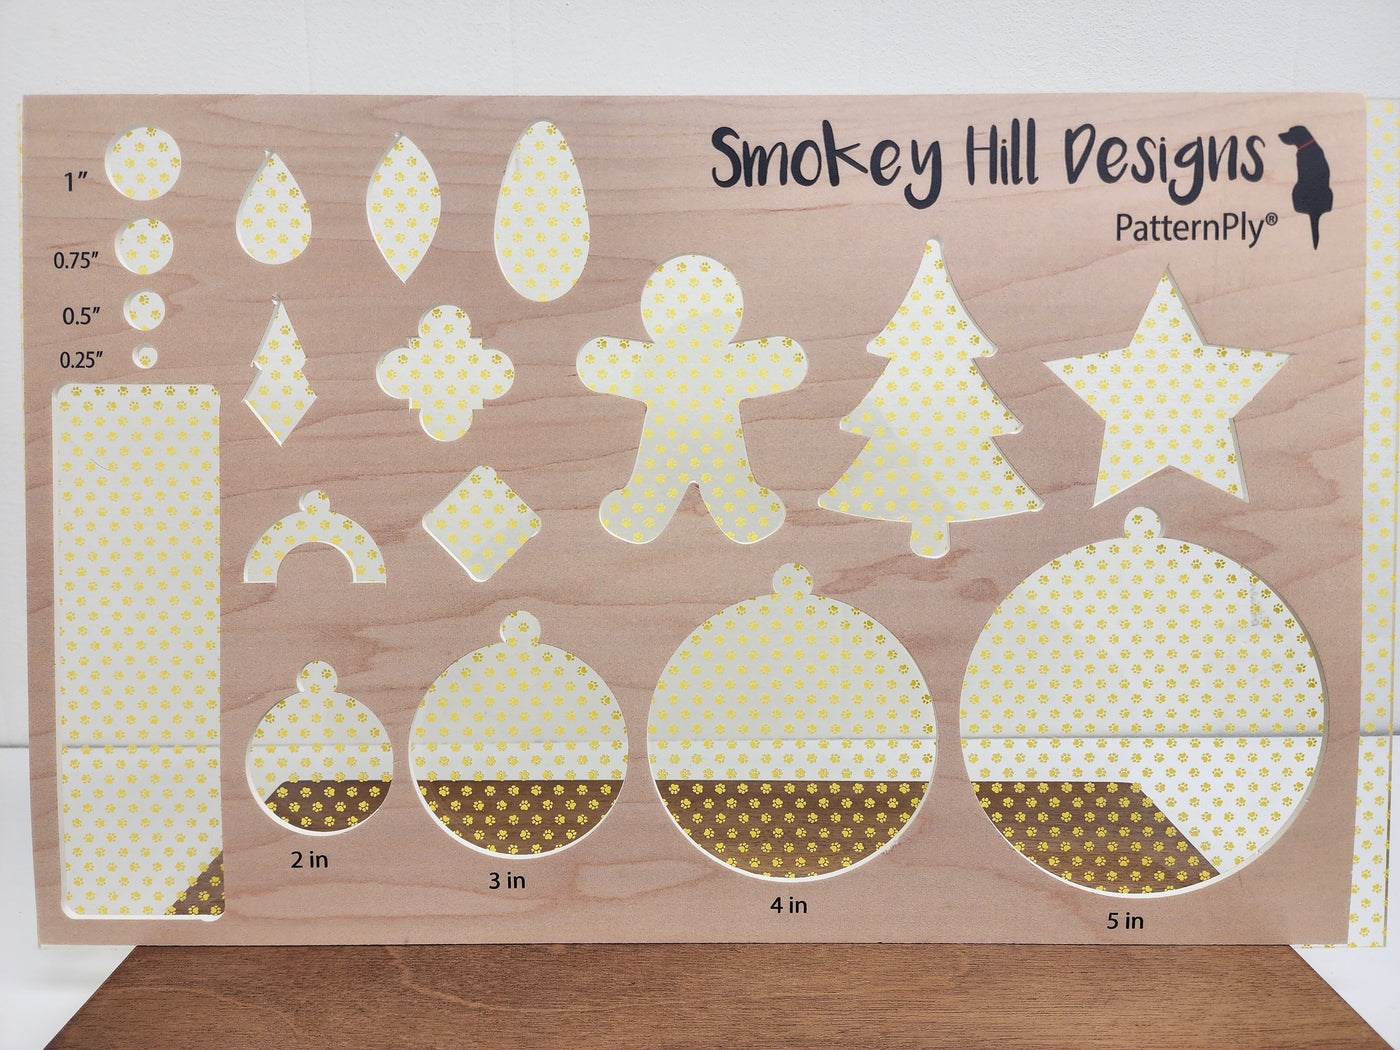 PatternPly® Scattered Micro School Pawprints YELLOW